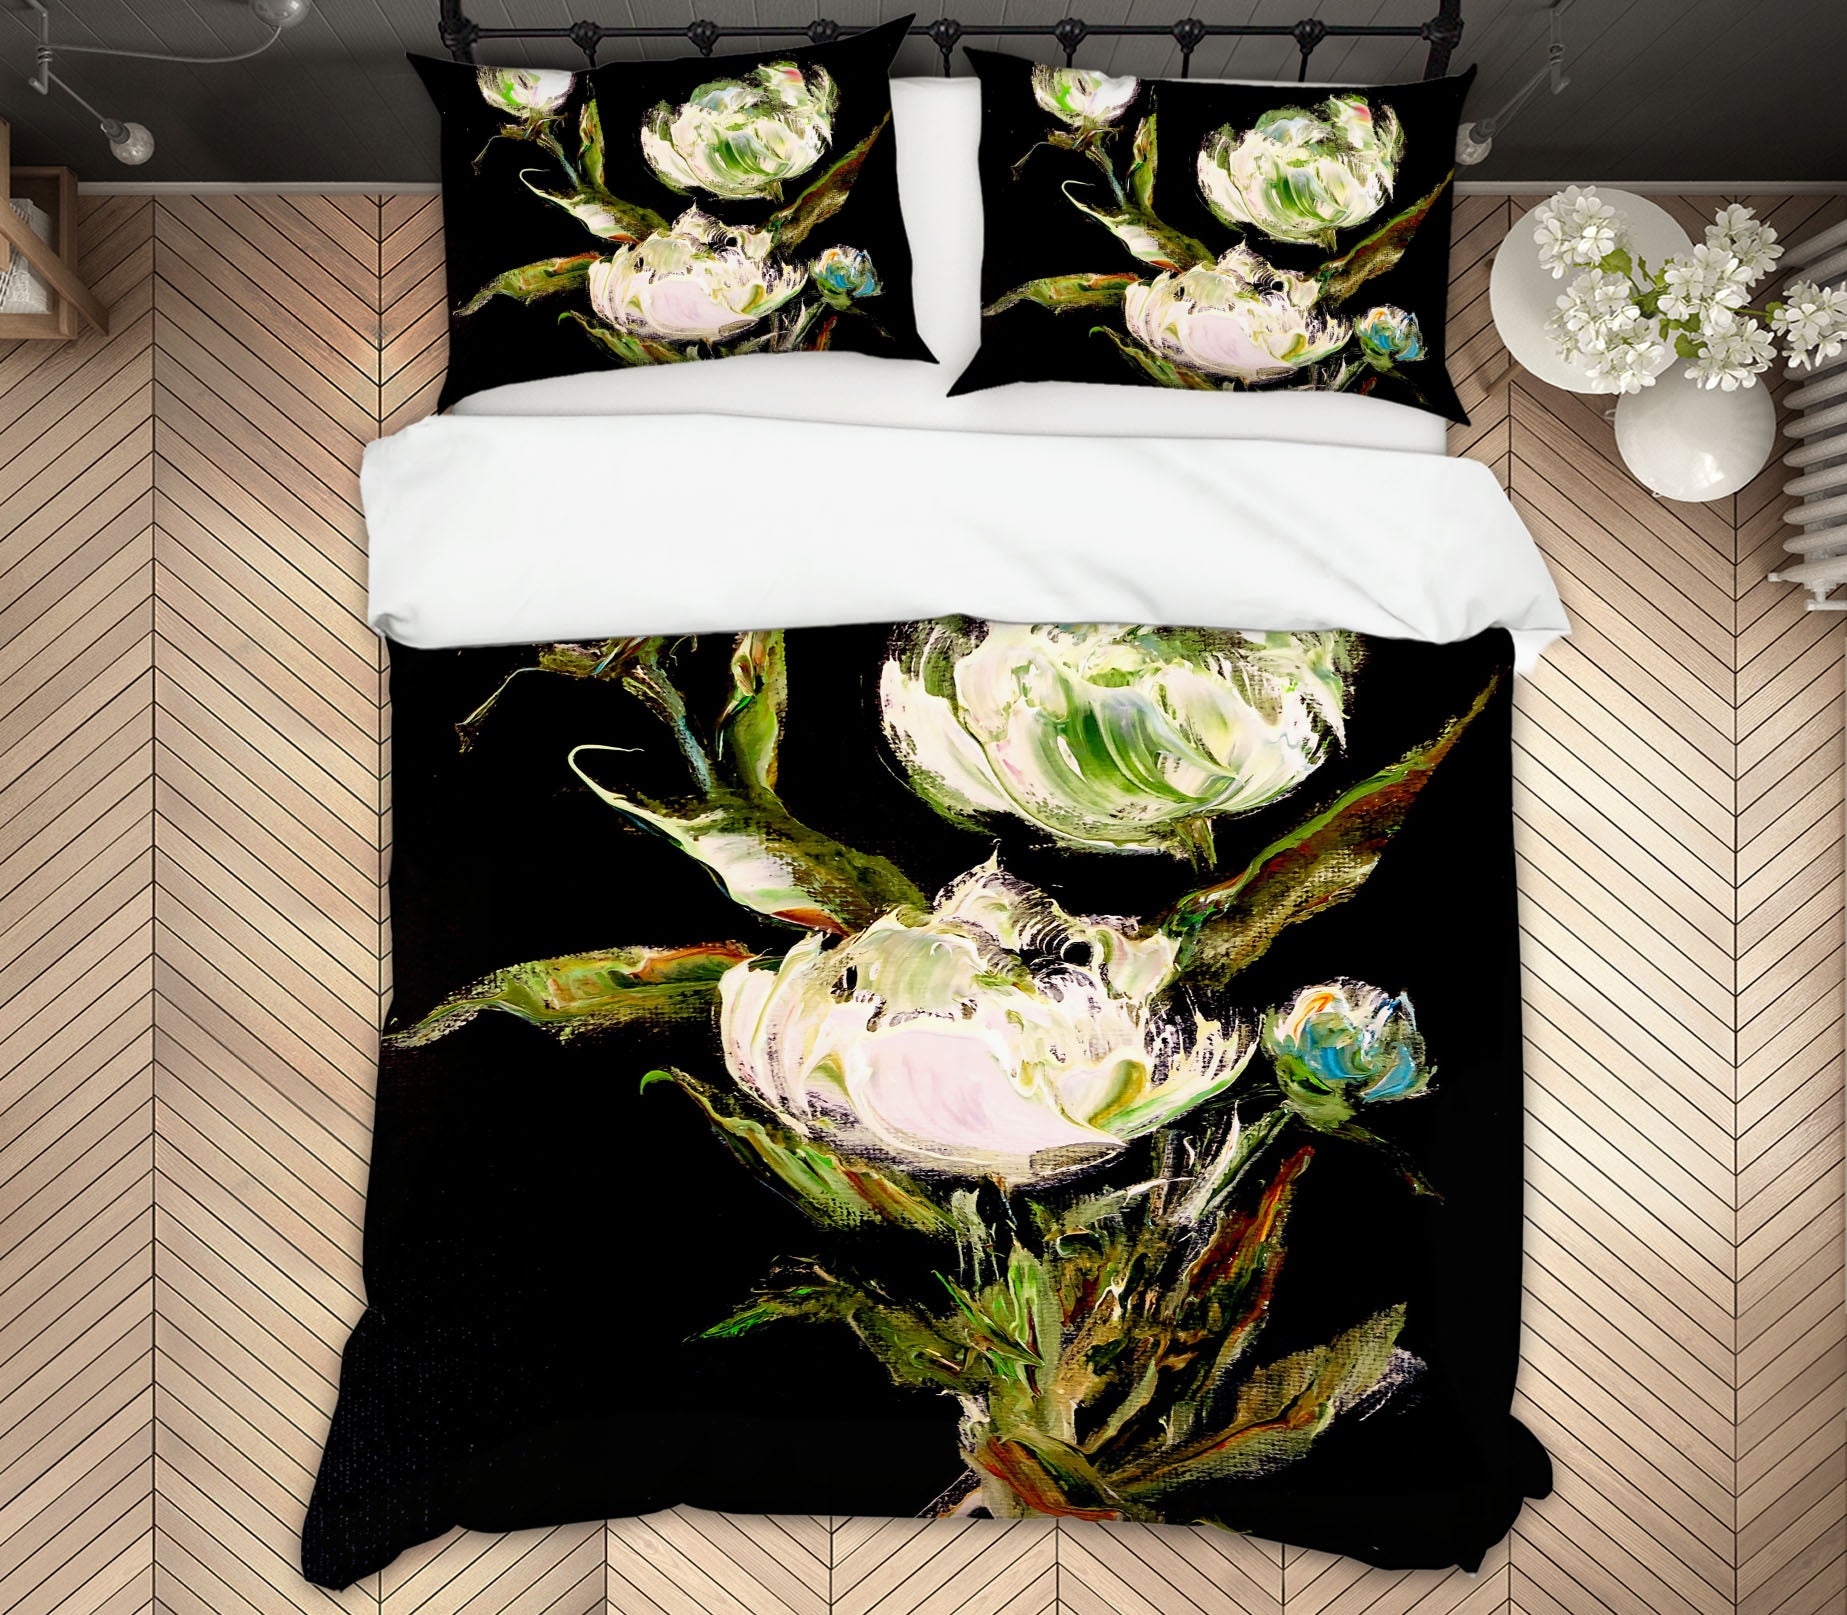 3D Hand Painted Flowers 581 Skromova Marina Bedding Bed Pillowcases Quilt